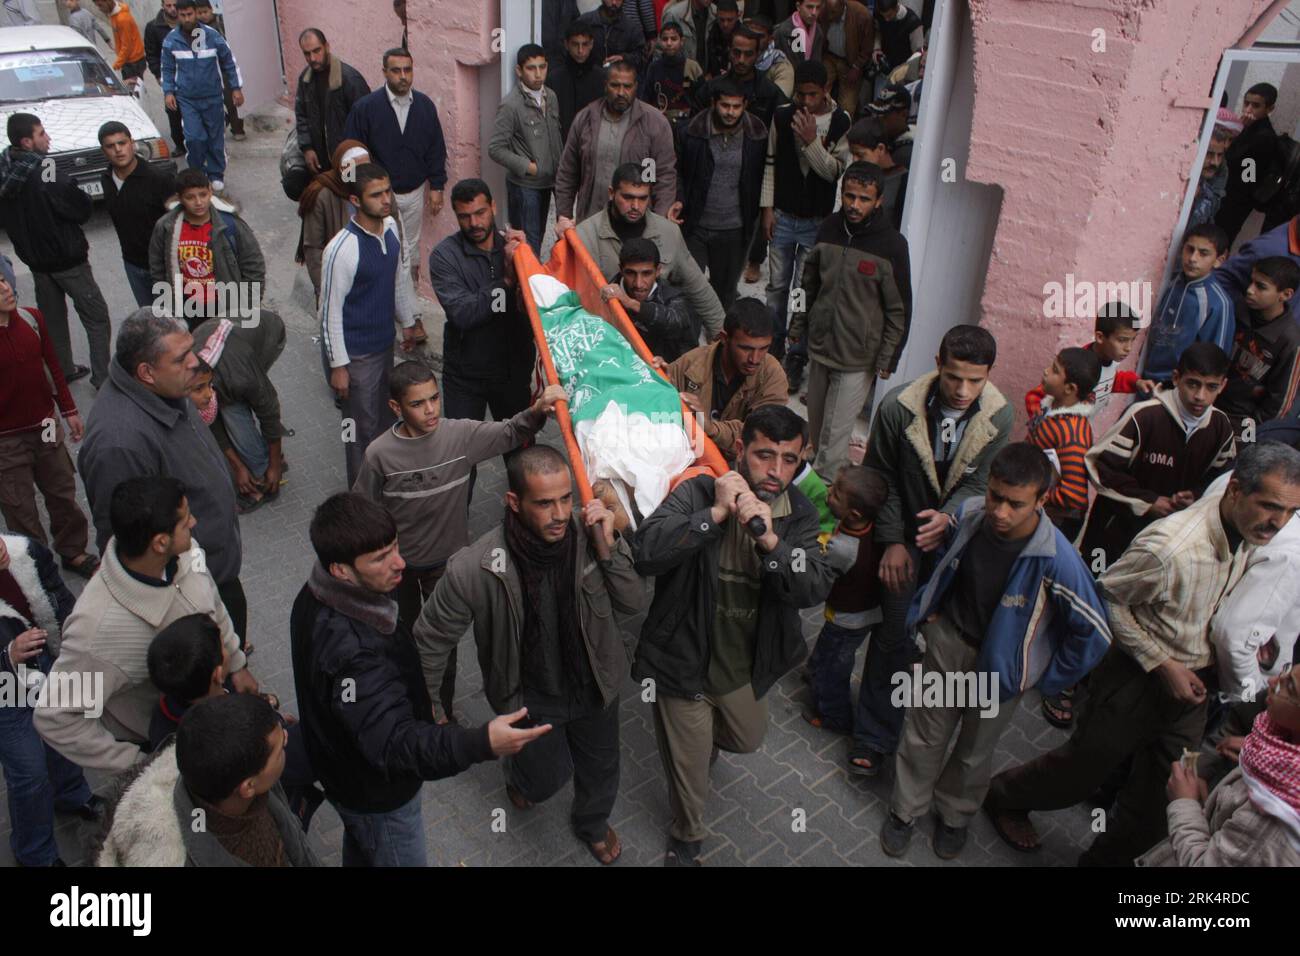 Bildnummer: 53661609  Datum: 12.12.2009  Copyright: imago/Xinhua (091212) -- GAZA, Dec. 12, 2009 (Xinhua)-- Palestinians carry the body of Sami Abu Khussa during his funeral at Bureij refugee camp in the central Gaza Strip on Dec. 12, 2009. The Palestinian farmer was killed on Saturday when he was caught in crossfire of a shootout between militants and Israeli soldiers in the Hamas-run Gaza Strip, officials said. (Xinhua/Khaled Omar) (ypf) PALESTINE-GAZA-CONFLICT-FUNERAL PUBLICATIONxNOTxINxCHN Palästina Beerdigung kbdig xng 2009 quer o0 Personen Trauer Leiche Trage    Bildnummer 53661609 Date Stock Photo